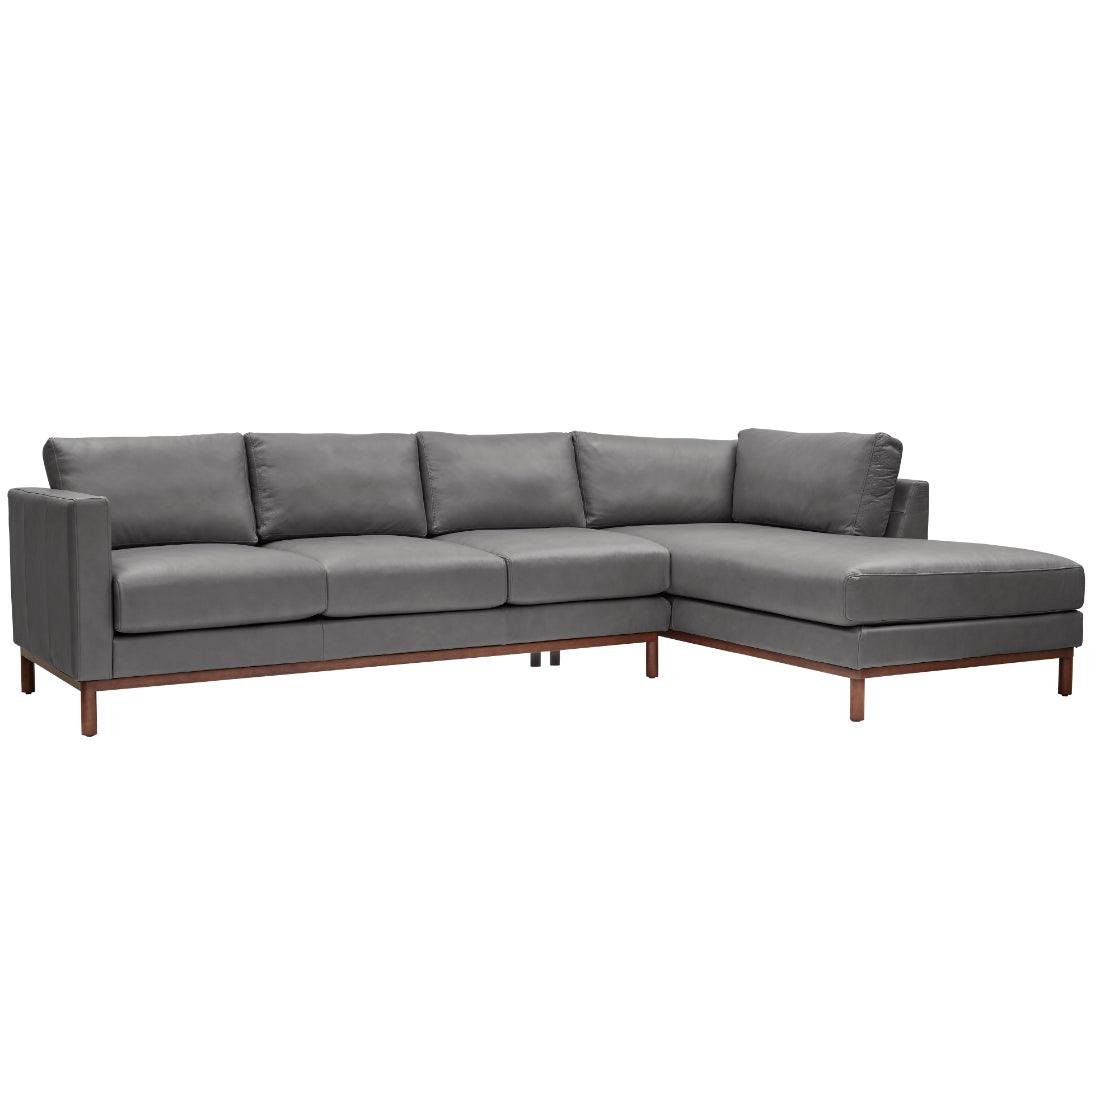 Freehand Leather Sectional With Chaise Made to Order - Uptown Sebastian